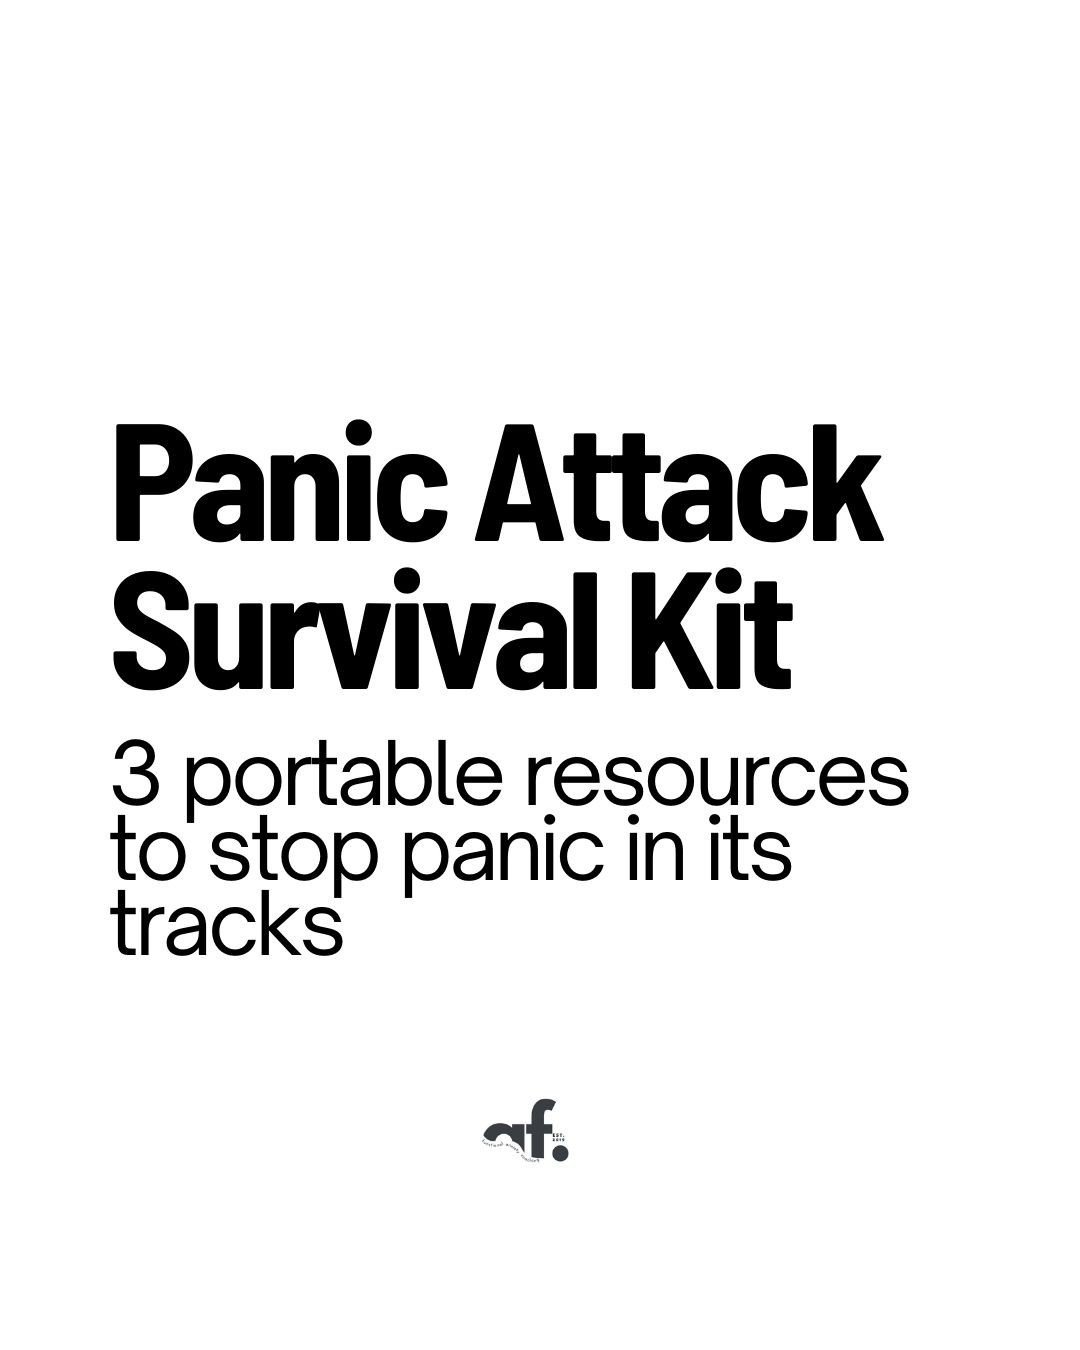 Panic attacks are surprisingly common, at least one third of us will experience a panic attack at some point in our lives, so if you experience panic attacks, know that you&rsquo;re not alone.⁠
⁠
Panic attacks come on suddenly and can feel as though 